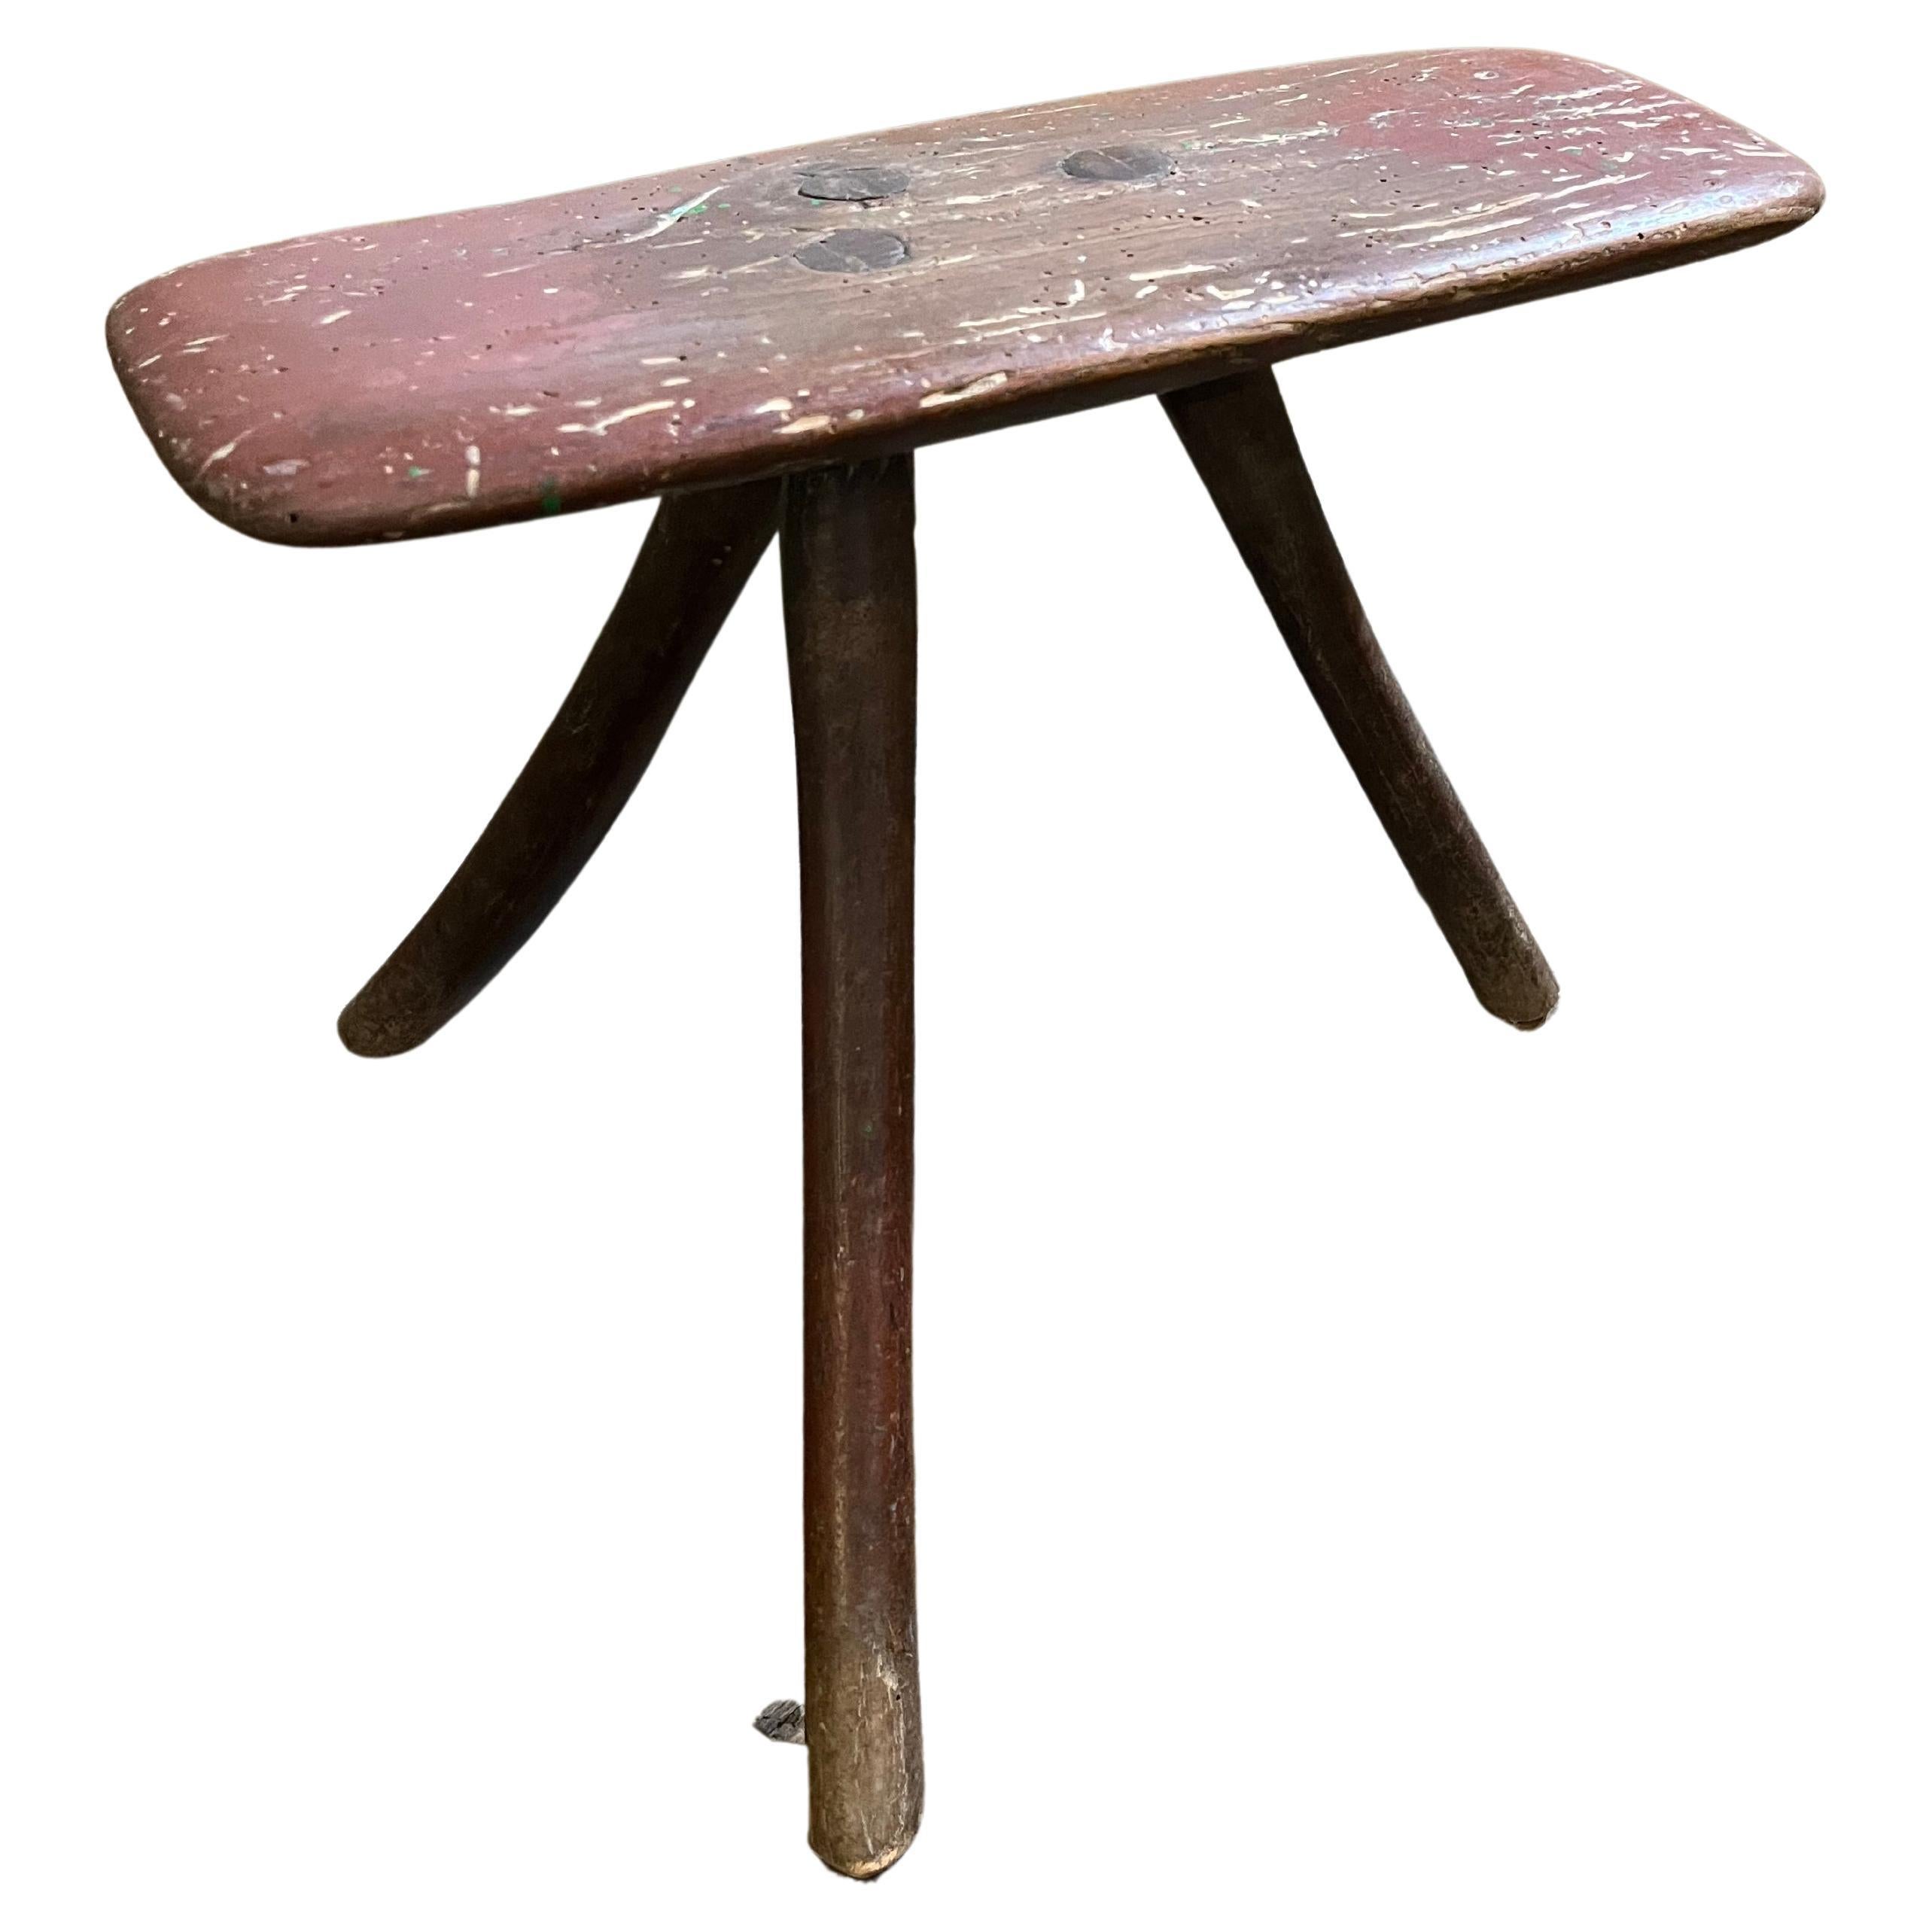 A very charming rustic later 19th century Milking Stool from the Catalan region of Spain.  A wonderful accessory piece.